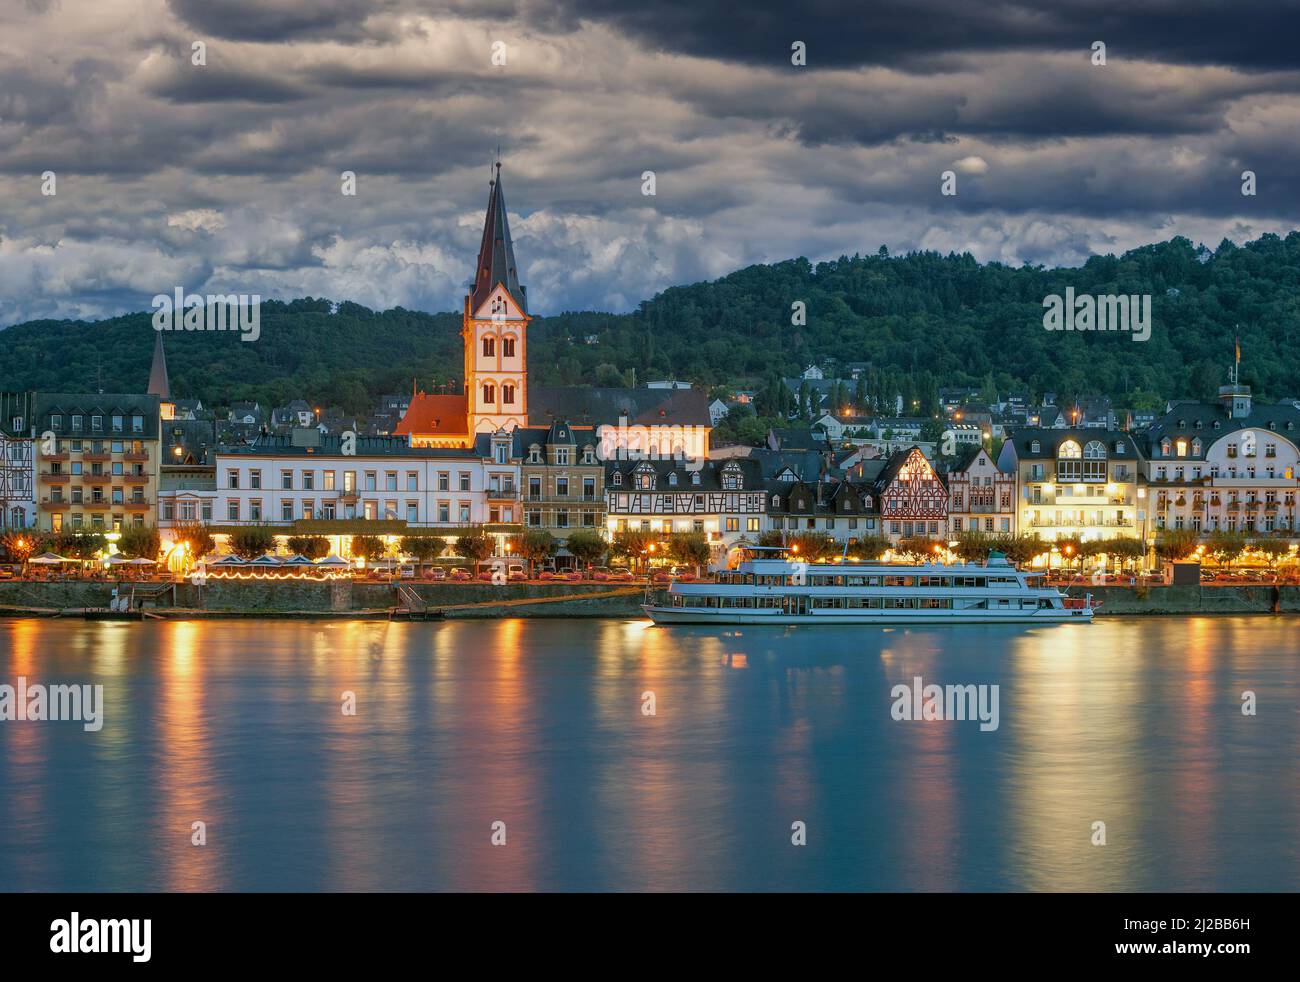 famous Wine Village of Boppard at Night,Rhine River,Germany Stock Photo